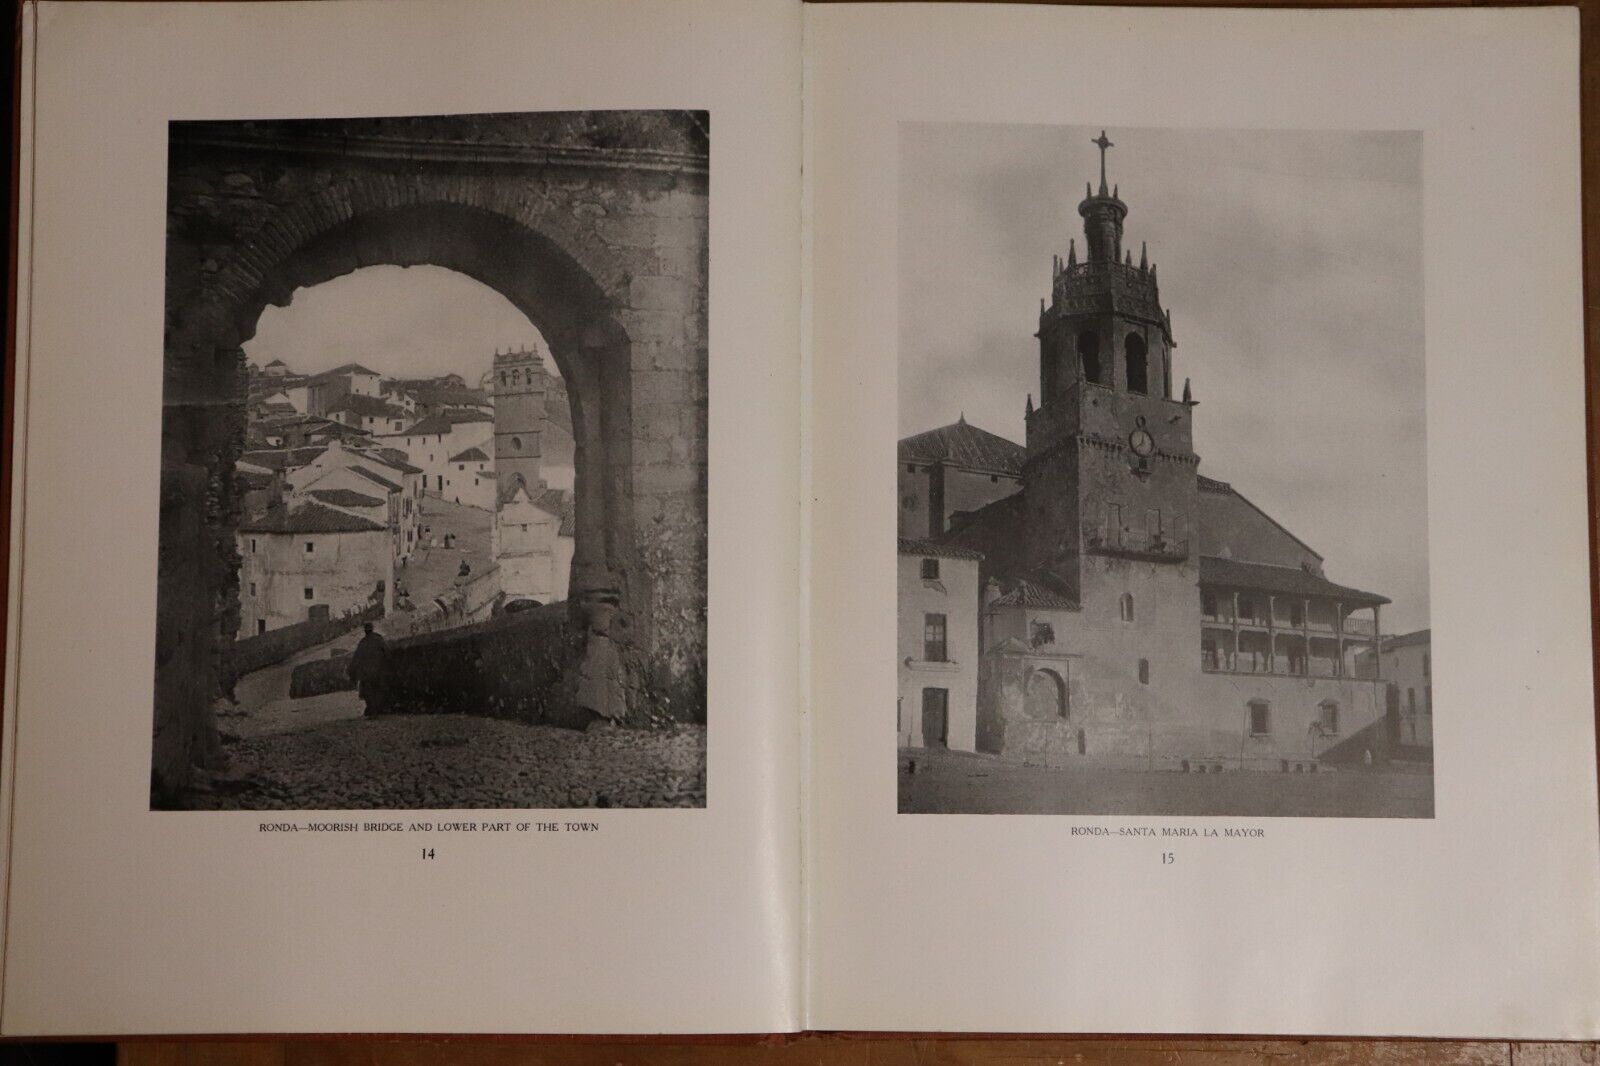 The Minor Ecclesiastical Domestic & Garden Architecture Of Southern Spain - 1917